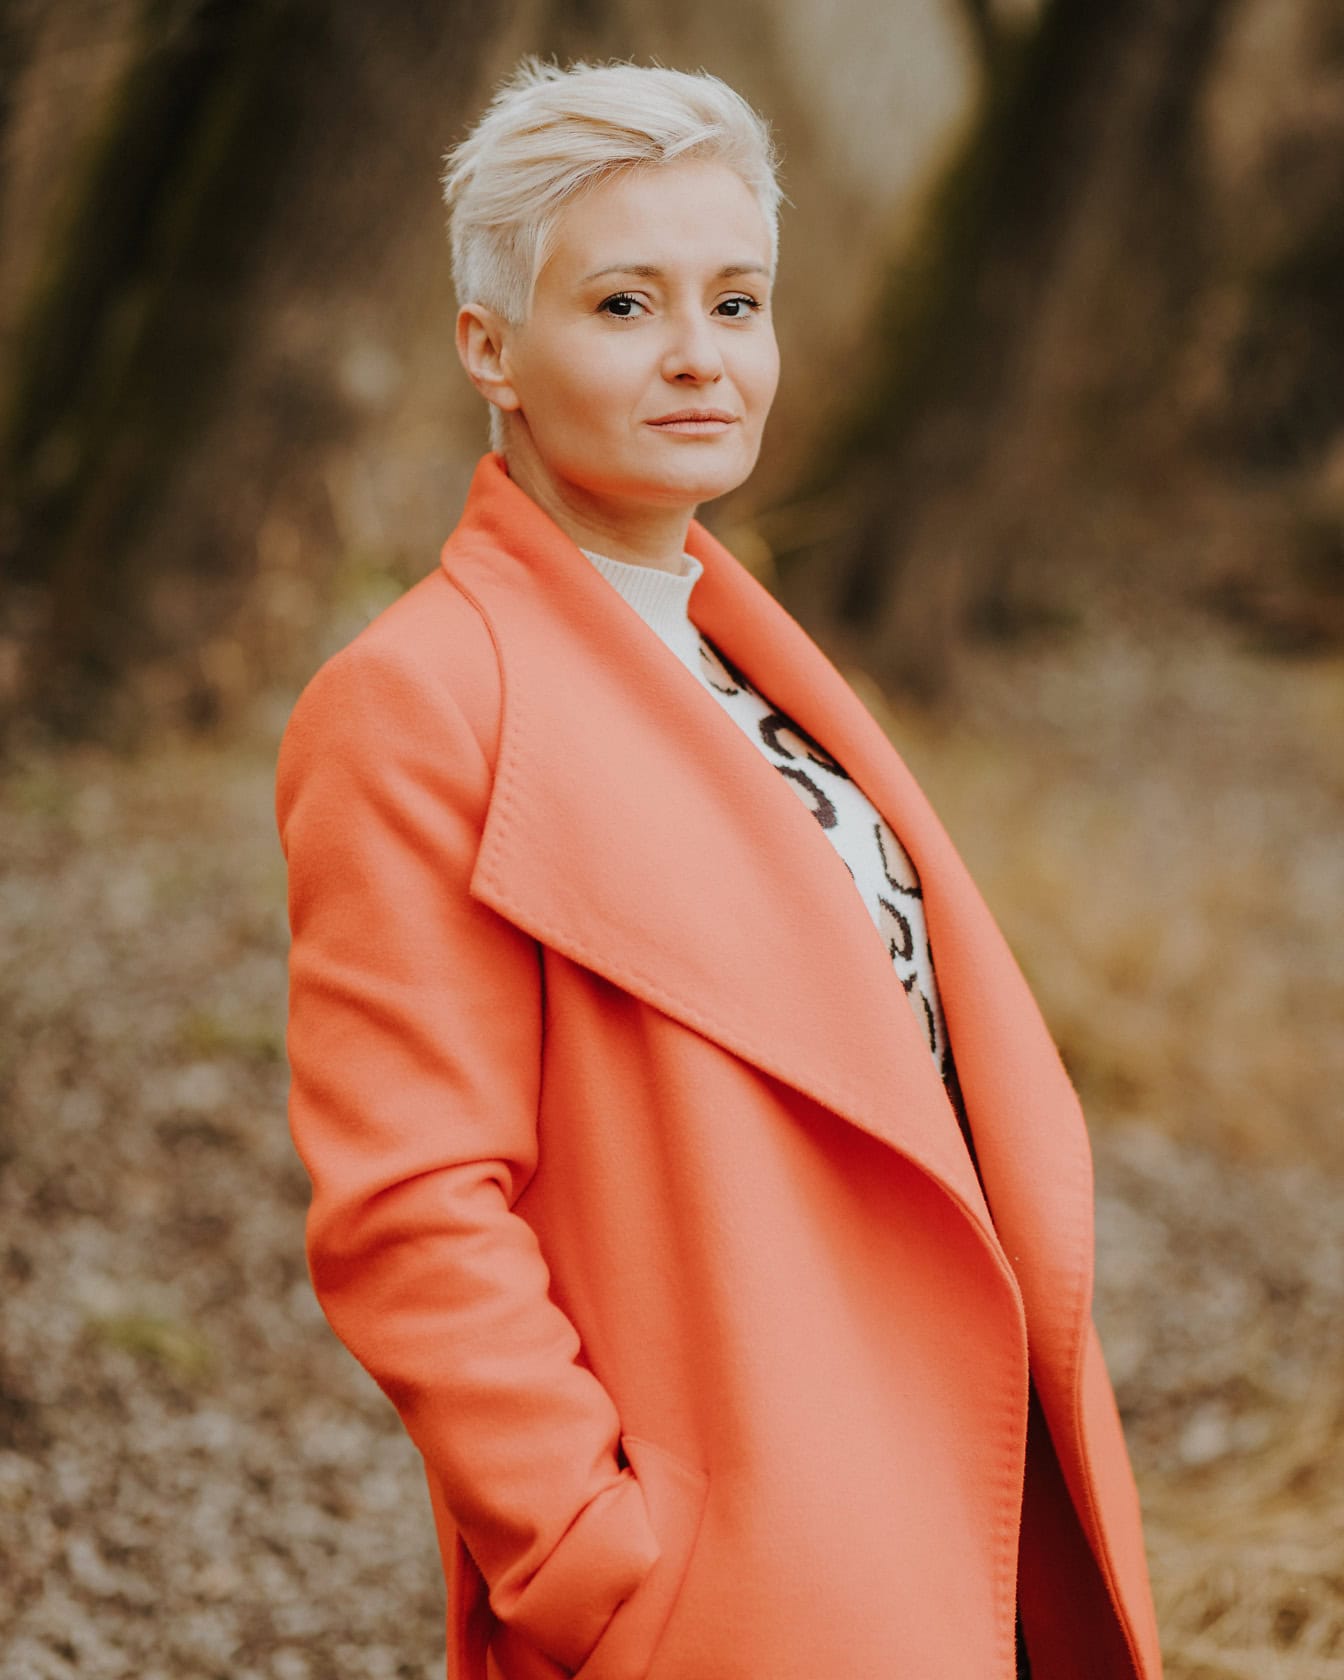 Beautiful blonde woman with short hair in an orange coat poses for a picture while standing